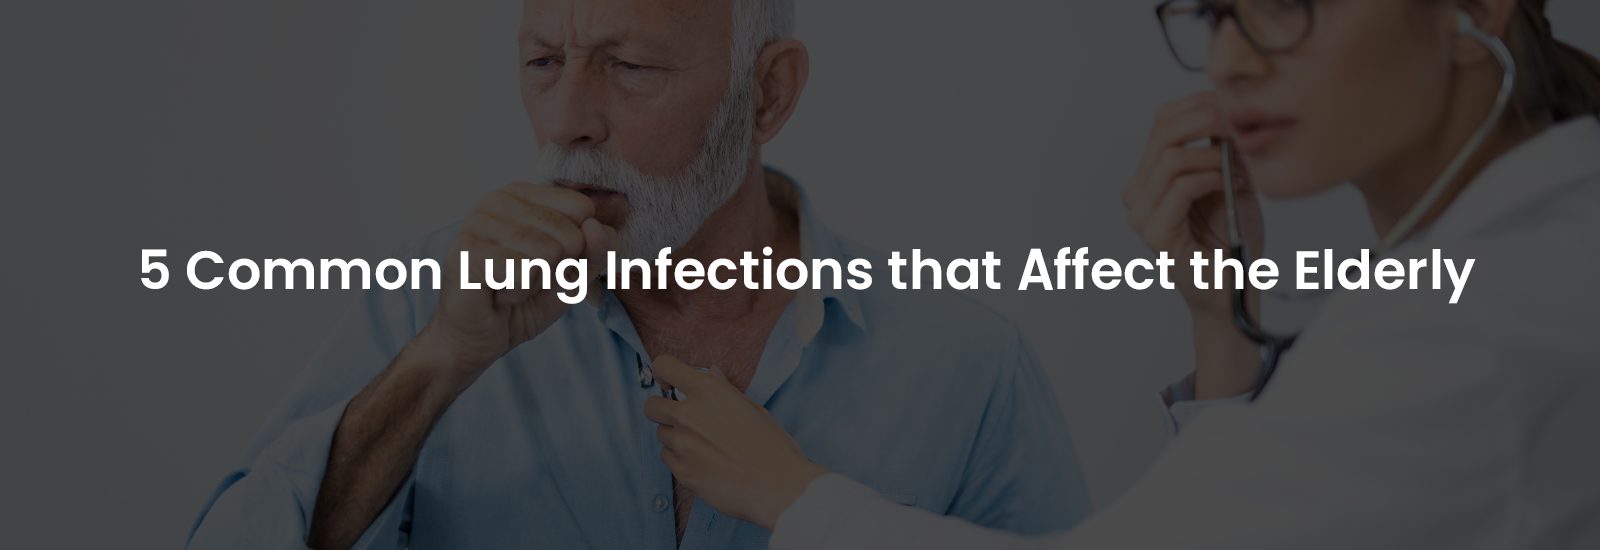 5 Common Lung Infections that Affect the Elderly | Banner Image